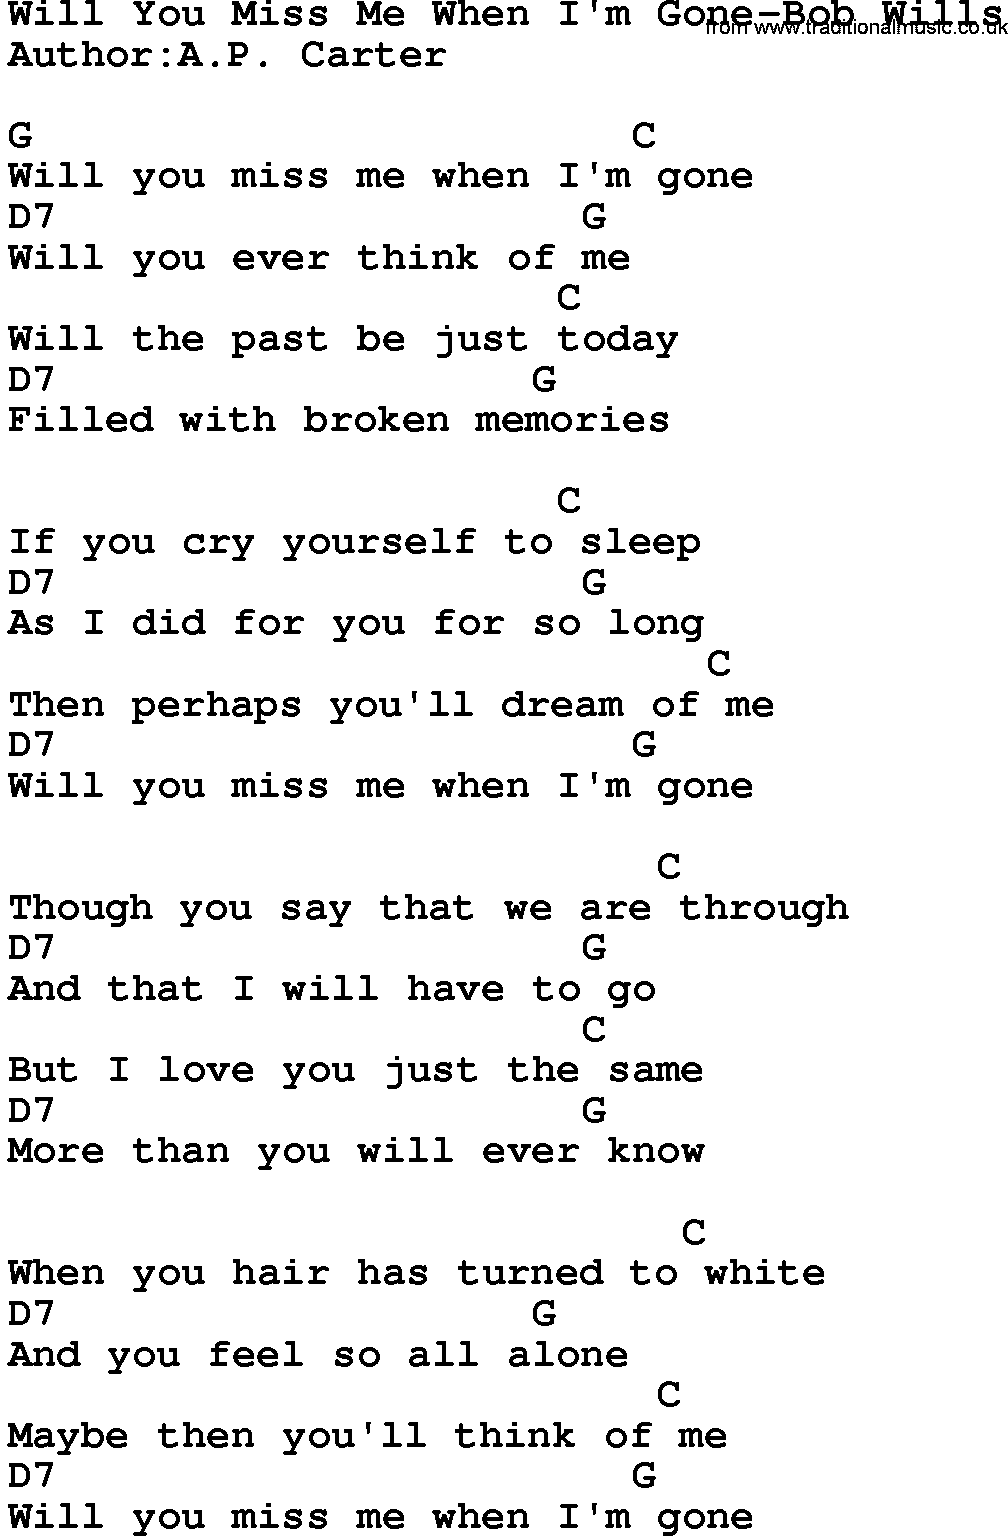 Country music song: Will You Miss Me When I'm Gone-Bob Wills lyrics and chords